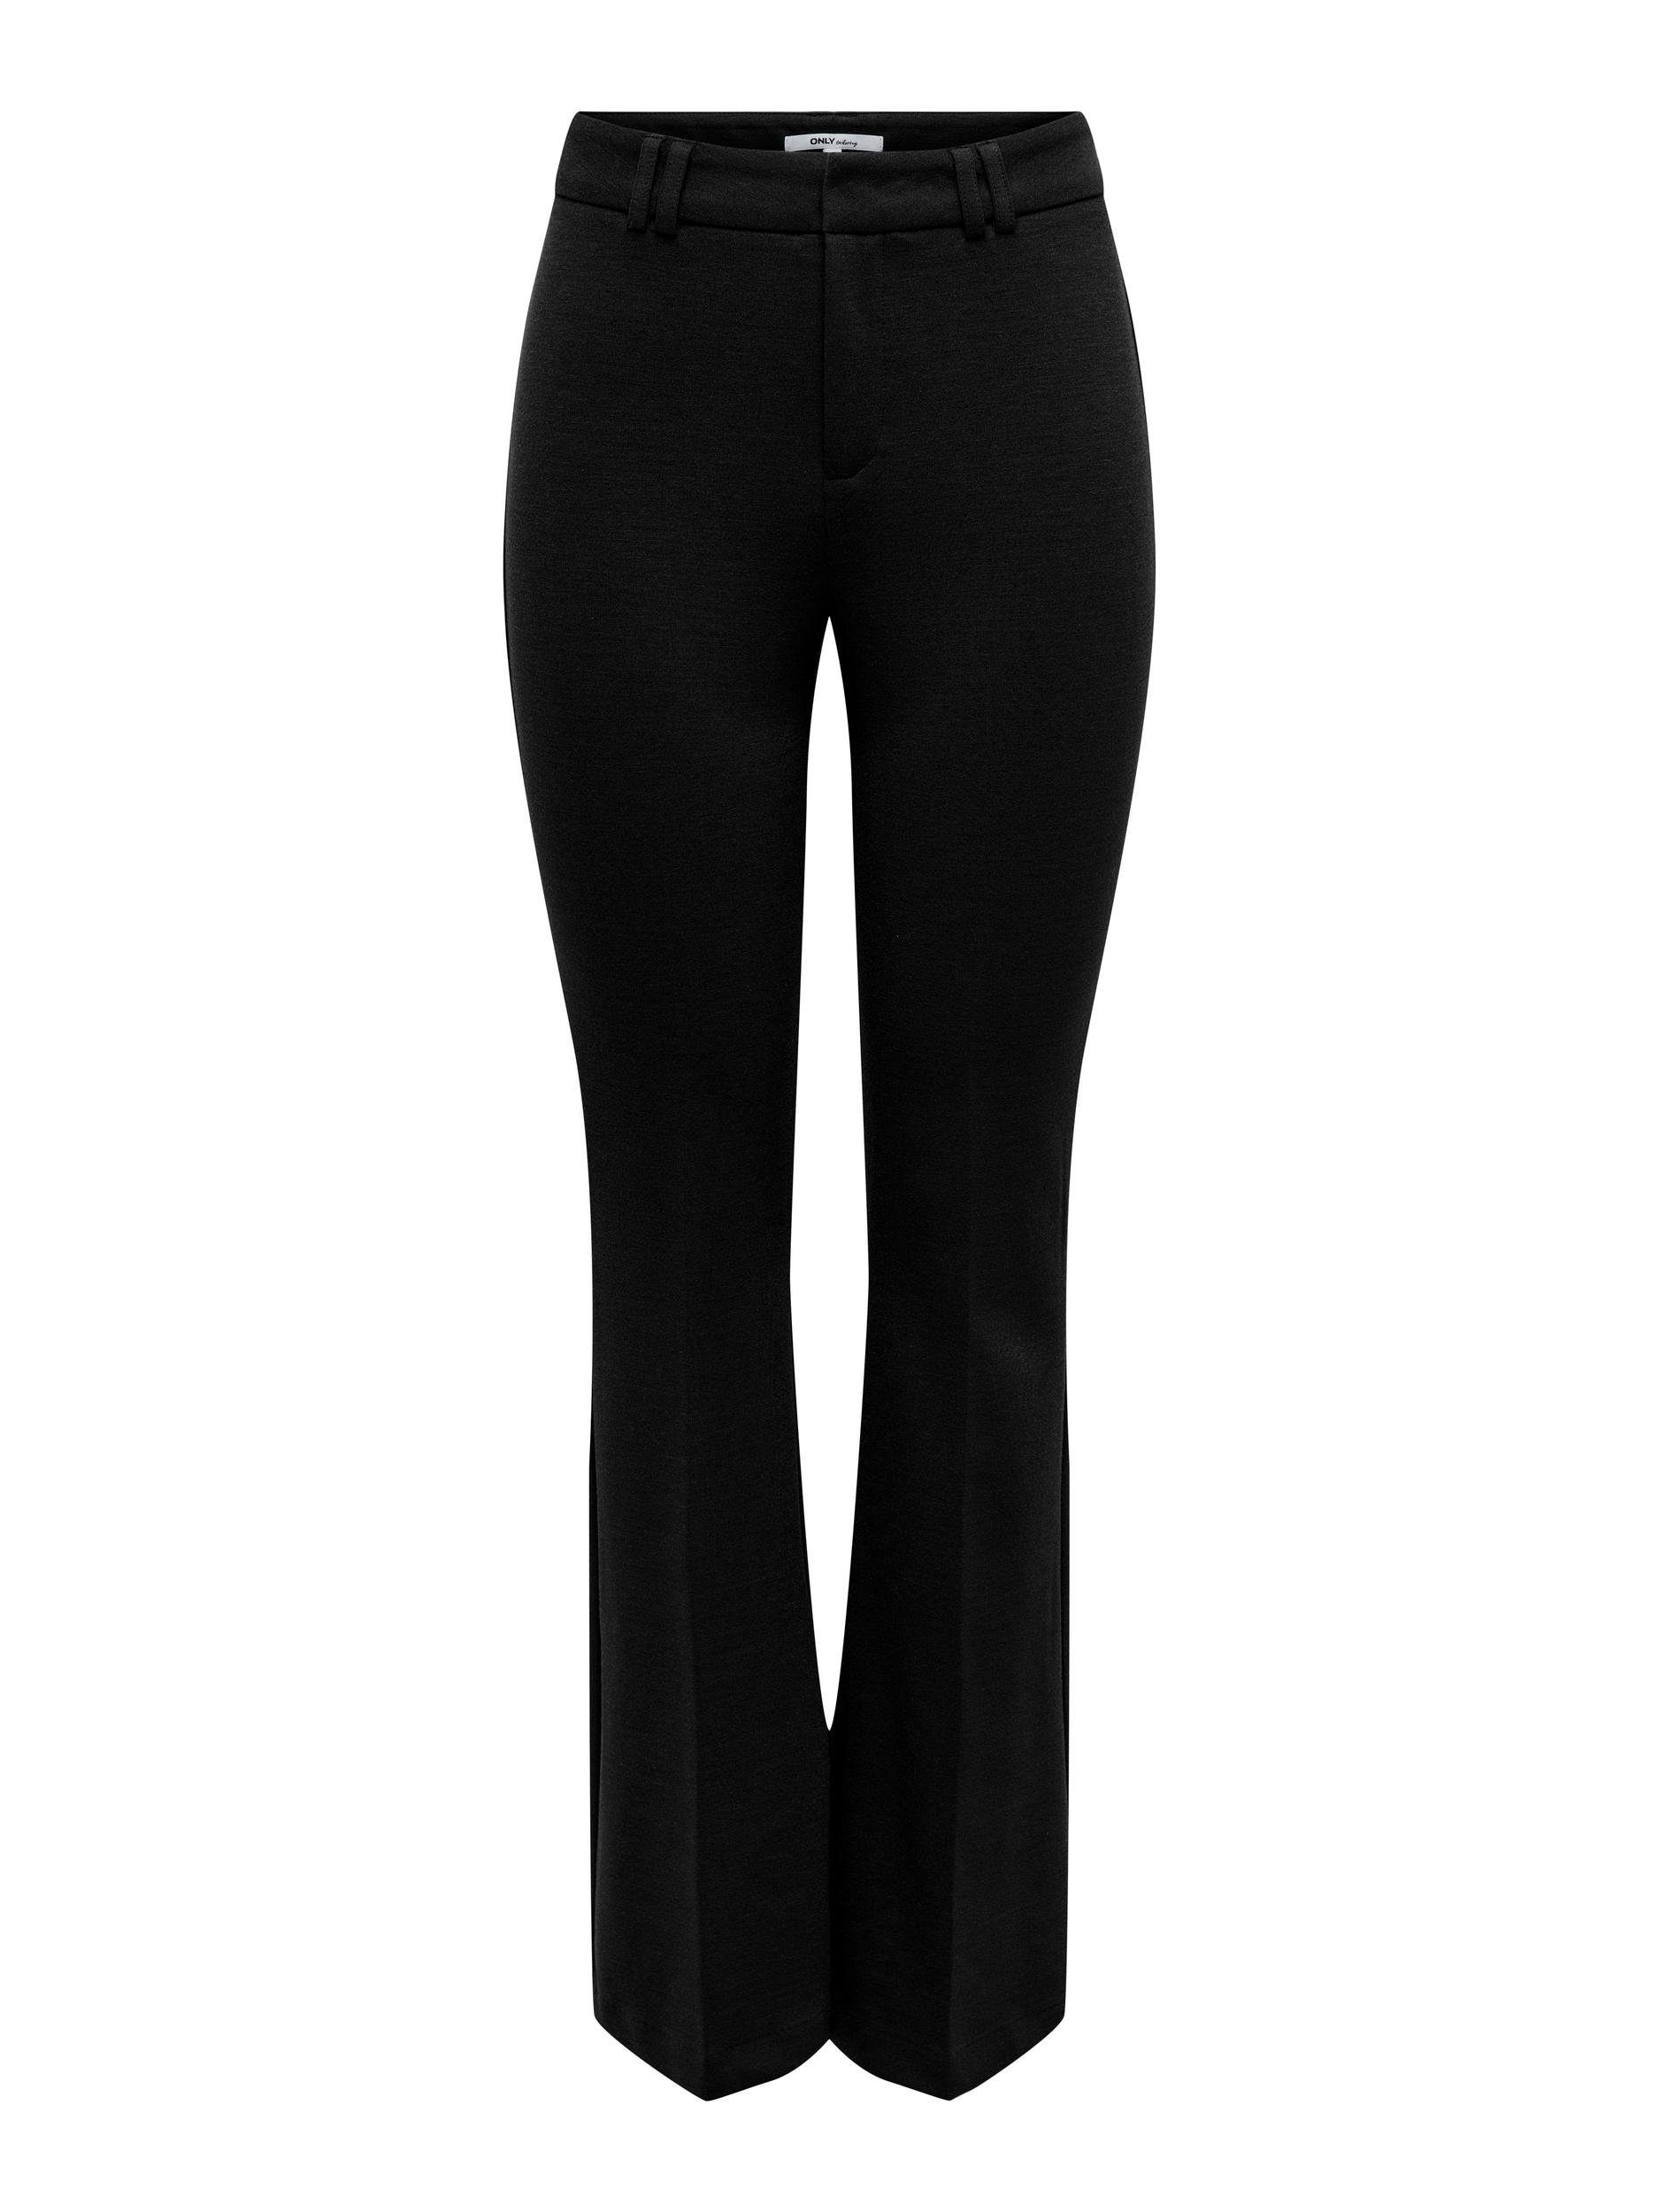 ONLPEACH NOOS Black ONLY MW Anzughose PANT FLARED TLR